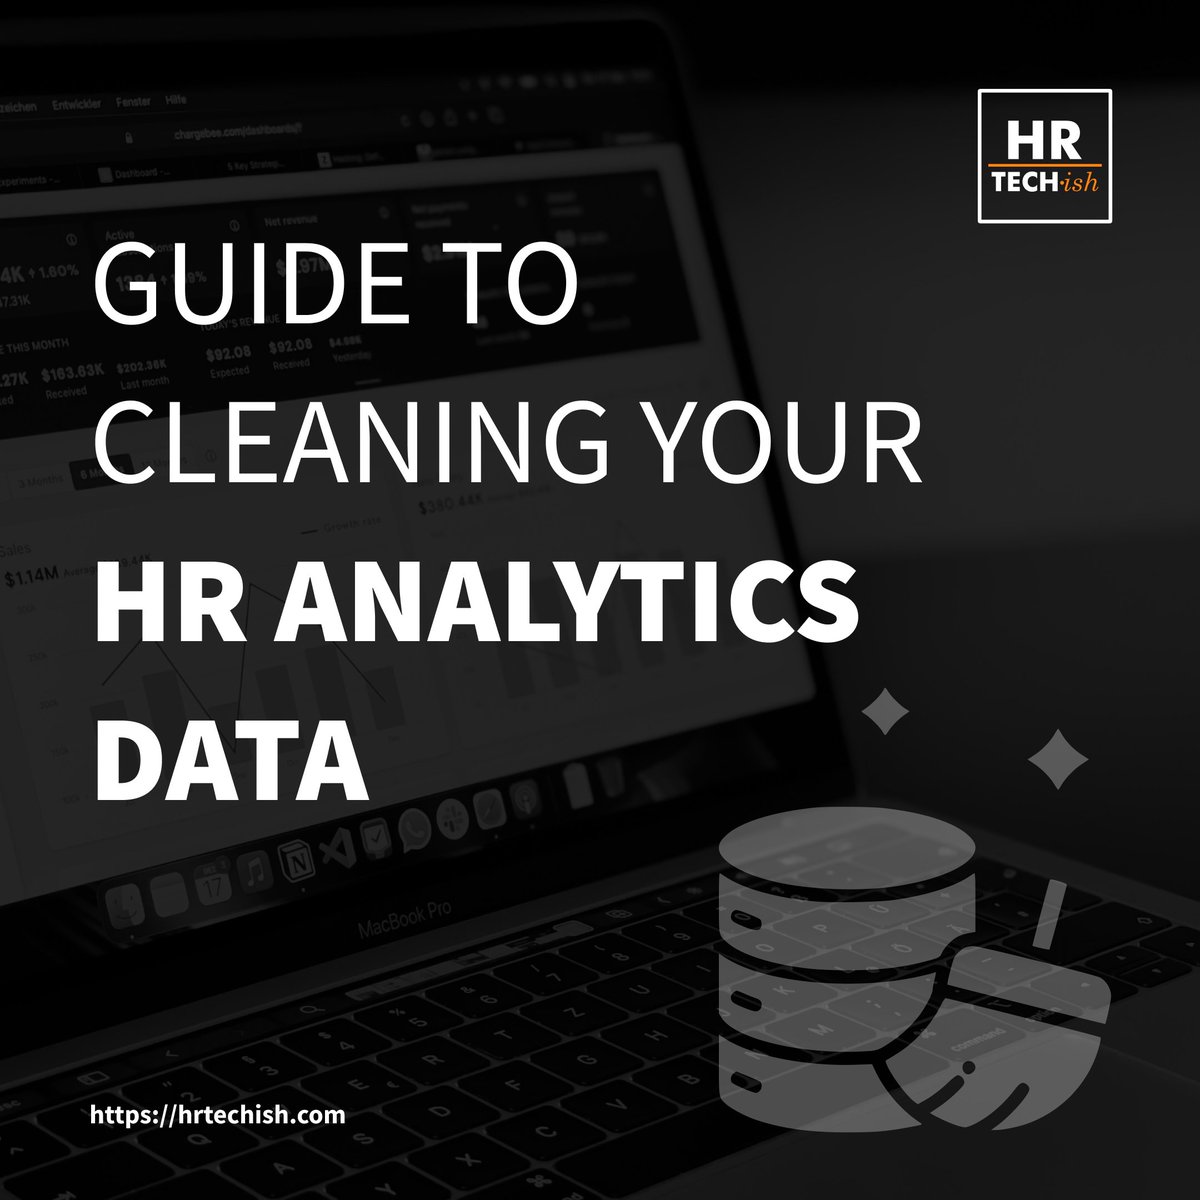 12 guides to cleaning your HR analytics data✨🧹

Clean and preprocess your HR data before conducting any analysis. Removing duplicates, handling missing values, standardizing formats, & transforming data into a consistent structure.

THREAD 👇🧵

#HRTechish #HRTech #HRmetrics